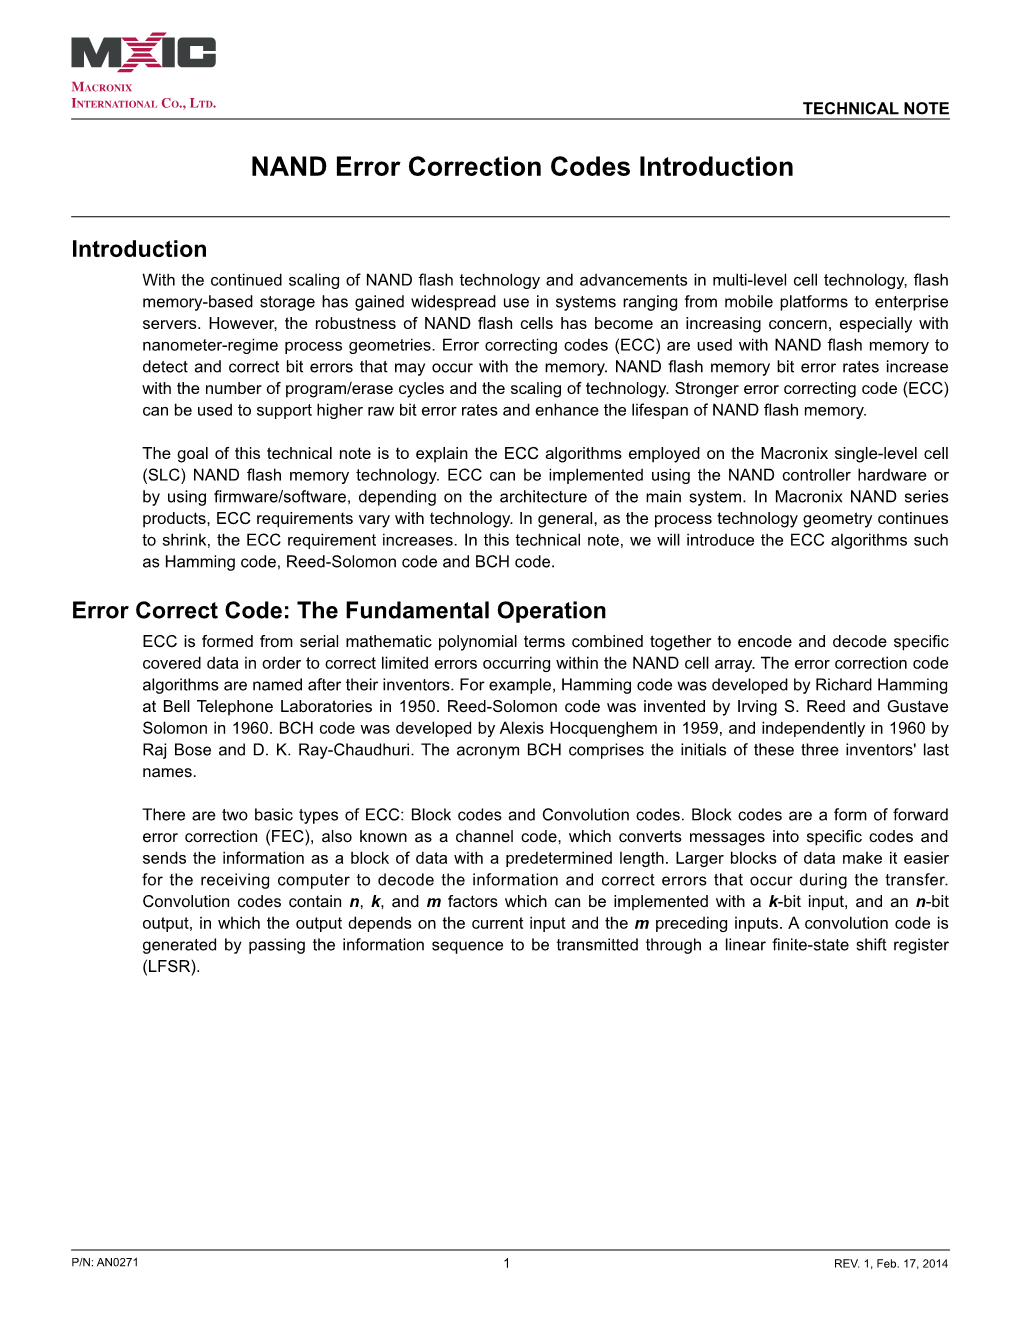 NAND Error Correction Codes Introduction